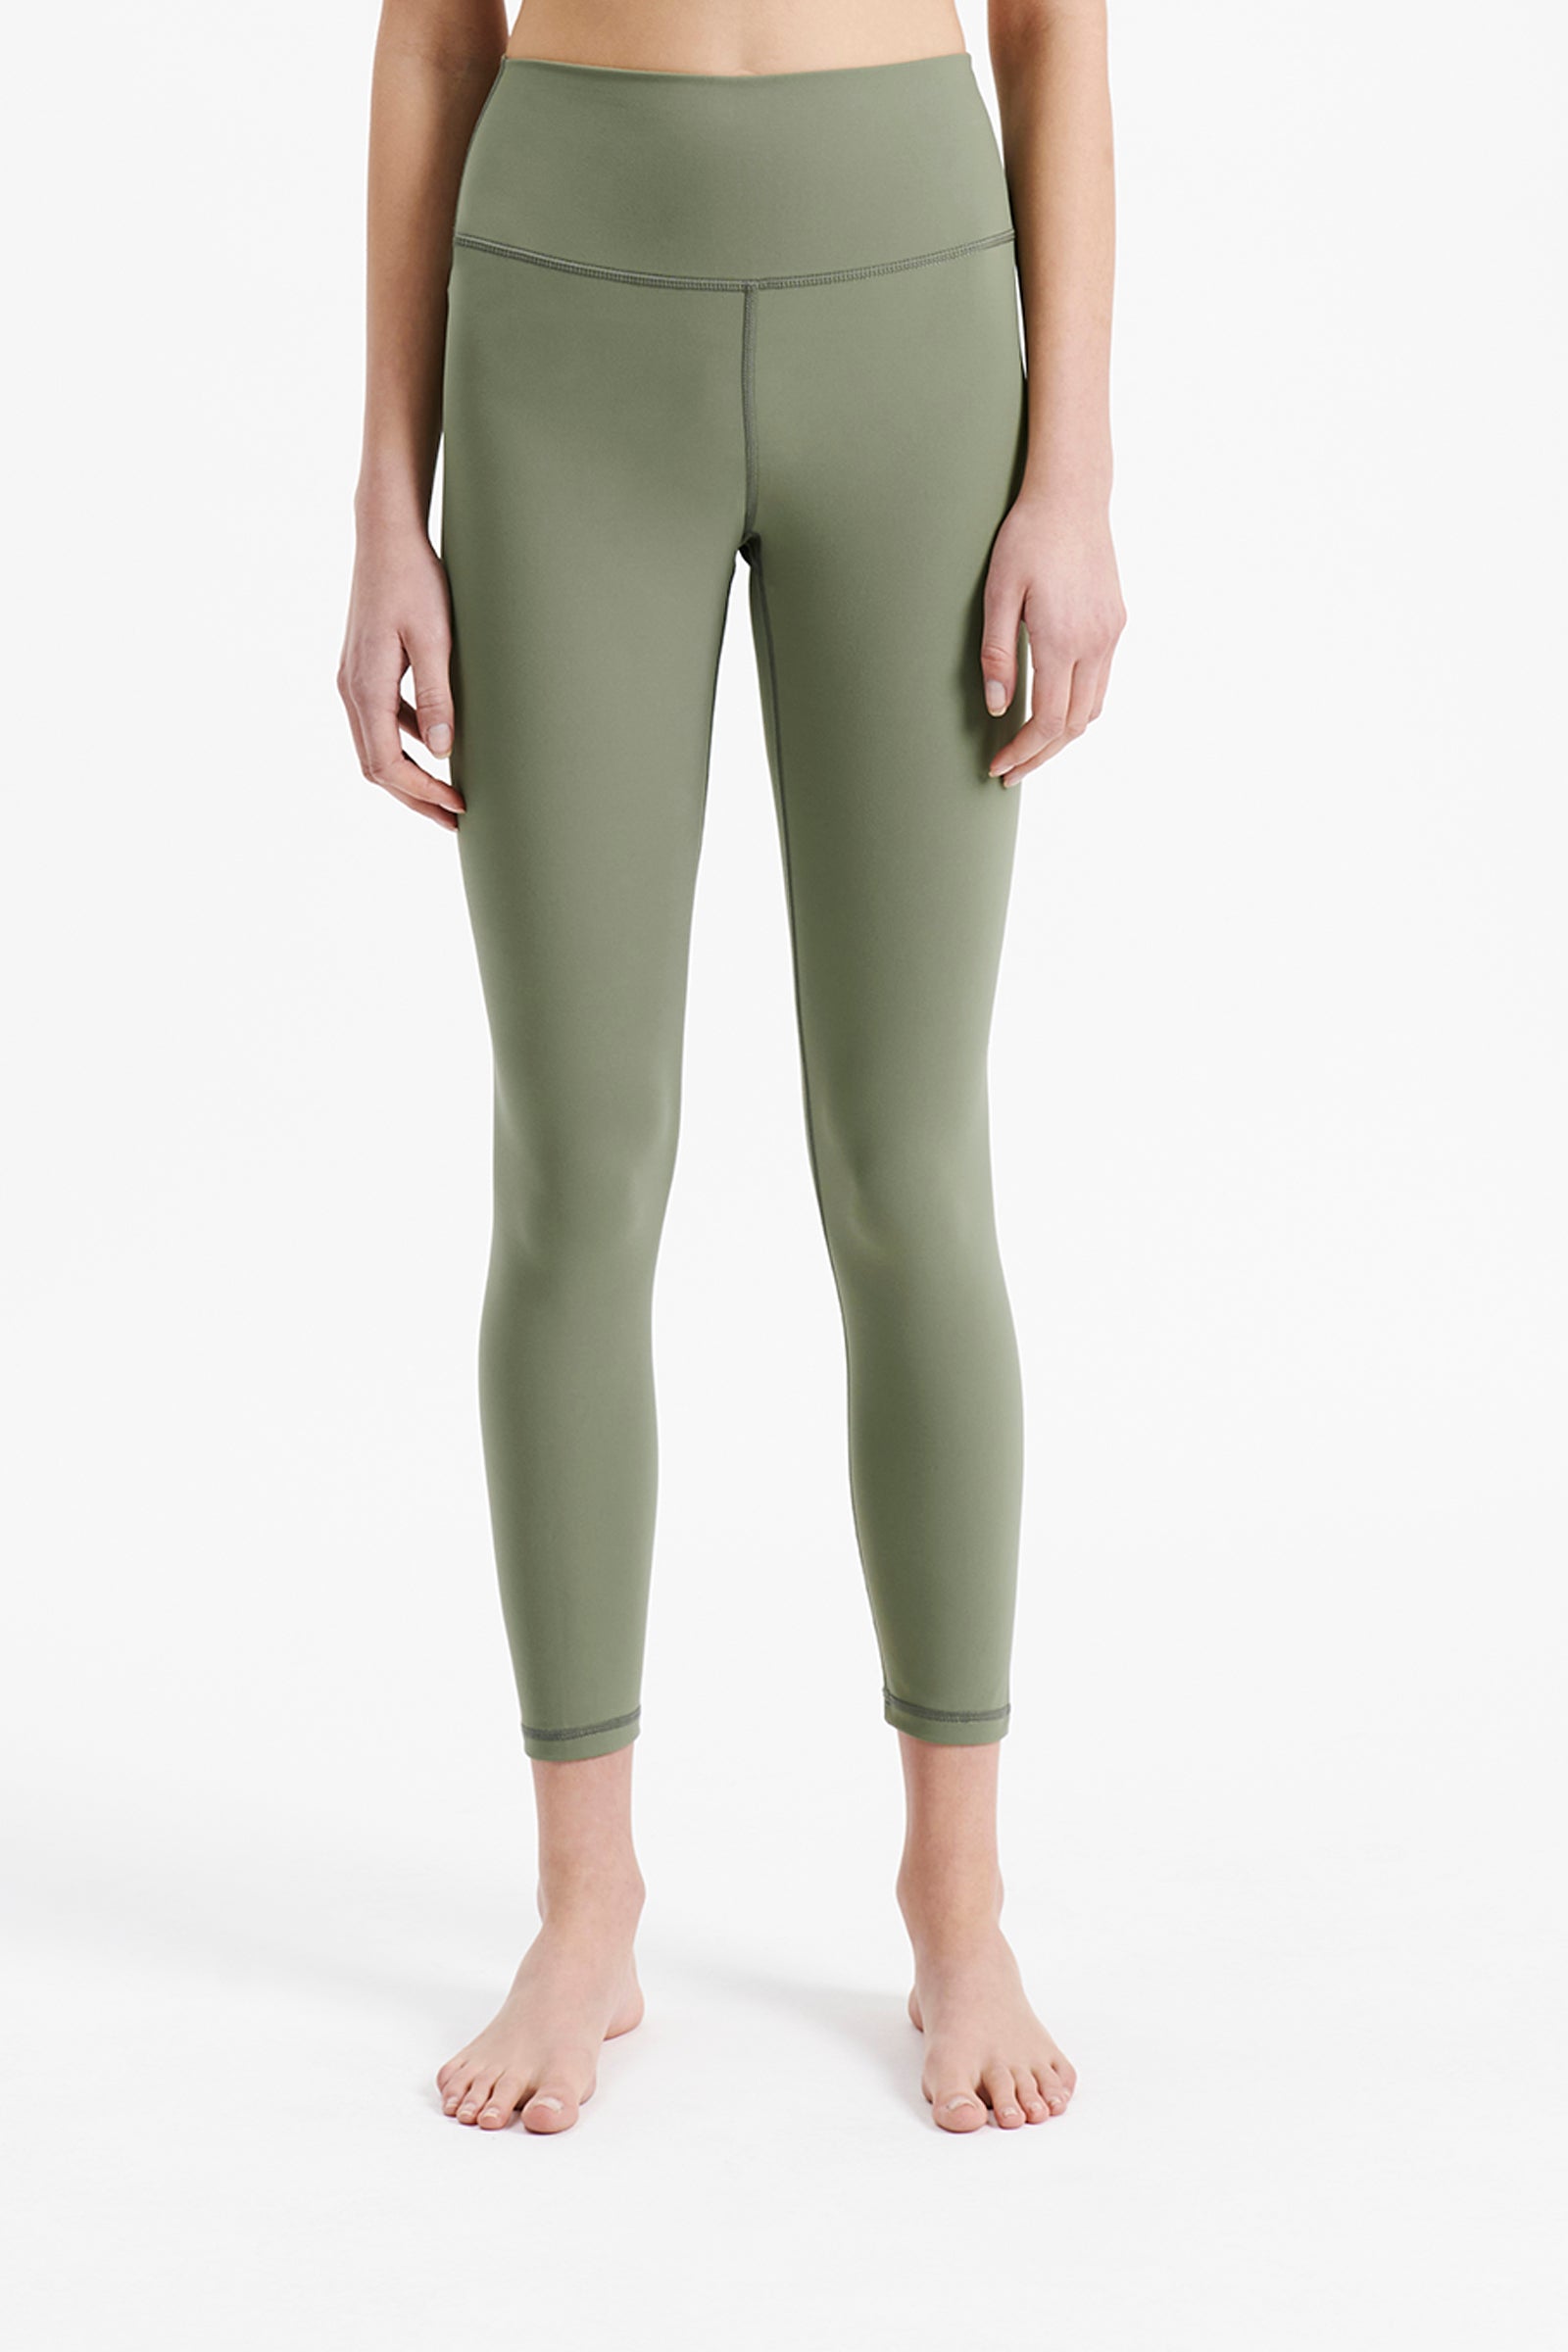 Nude Lucy Nude Active Tights In A Green Willow Colour 